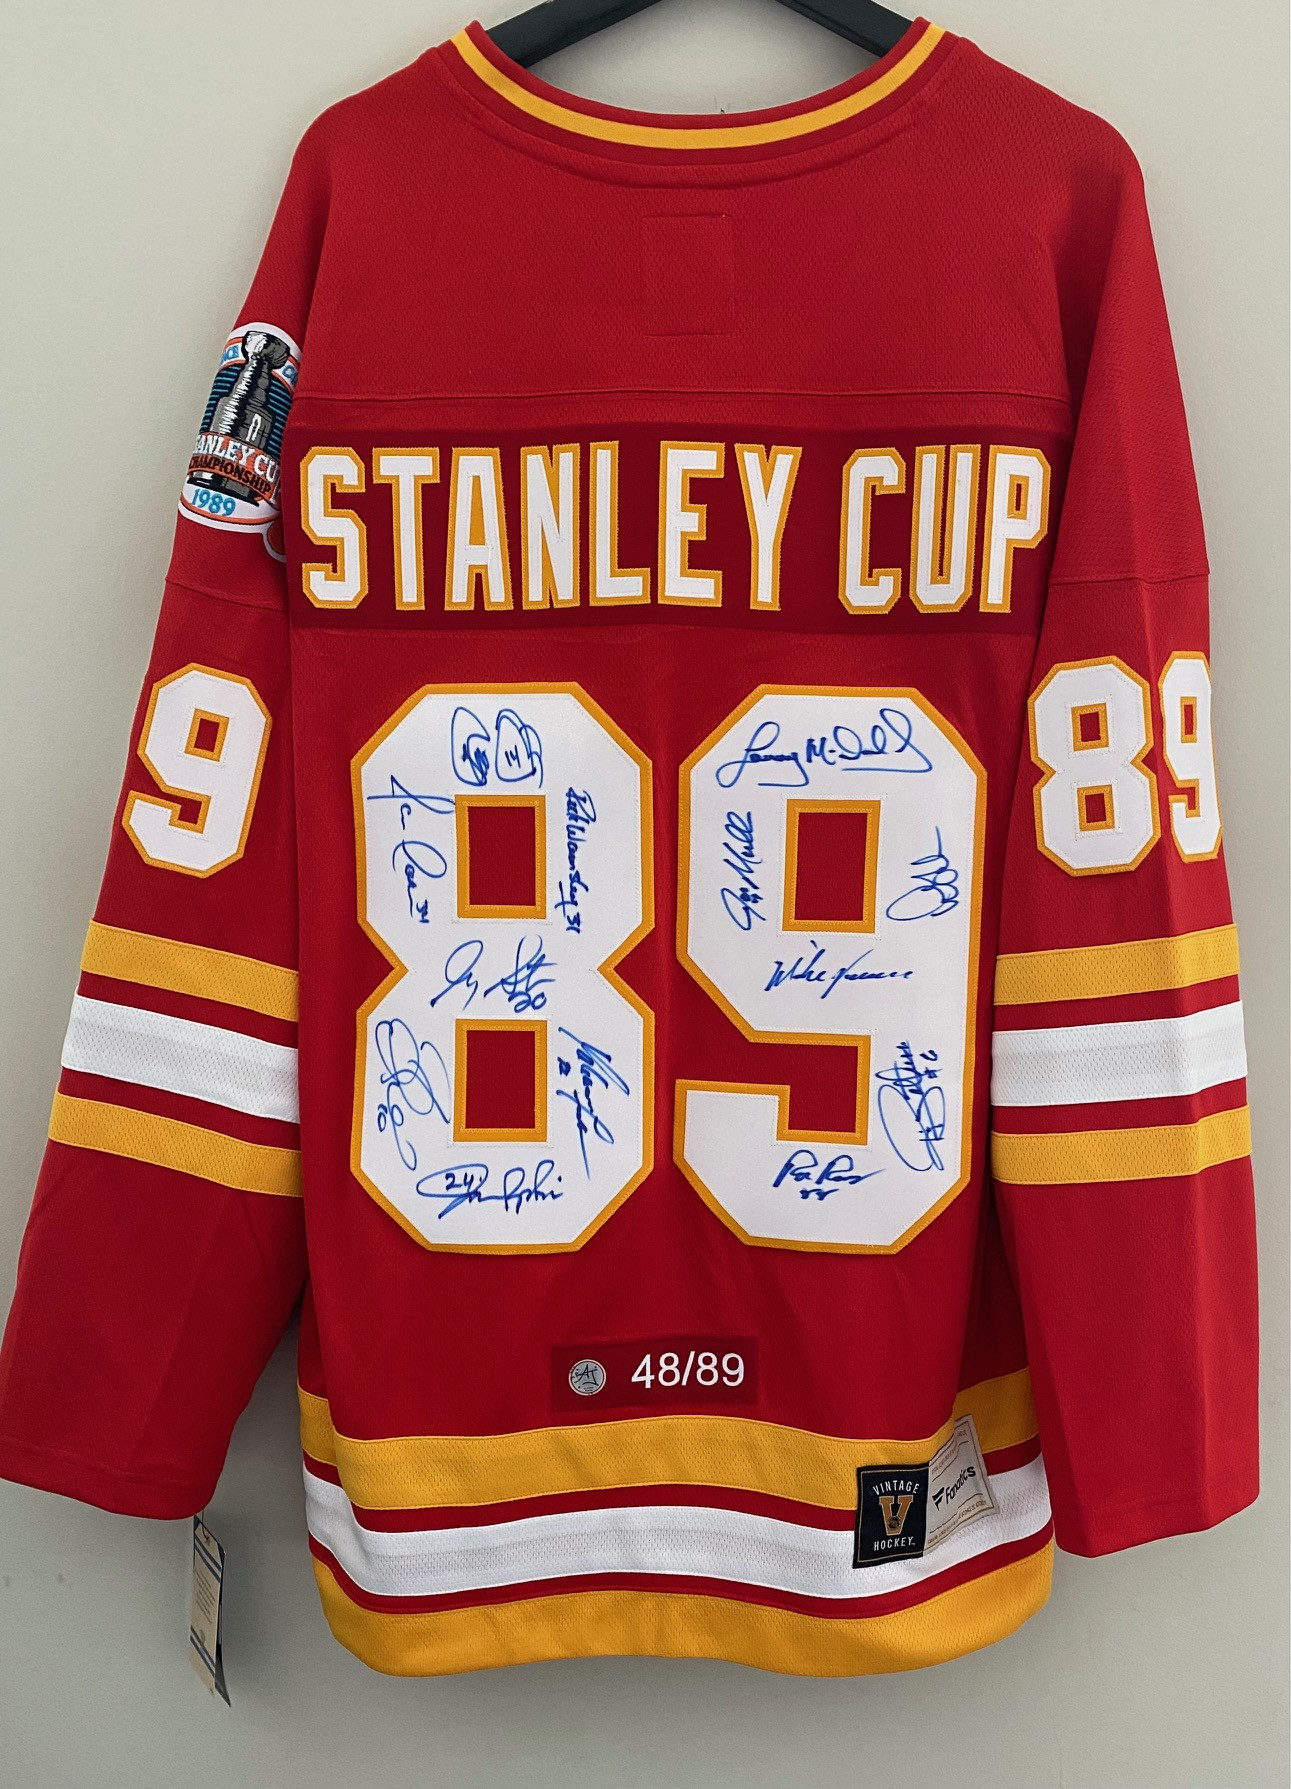 1989 flames jersey